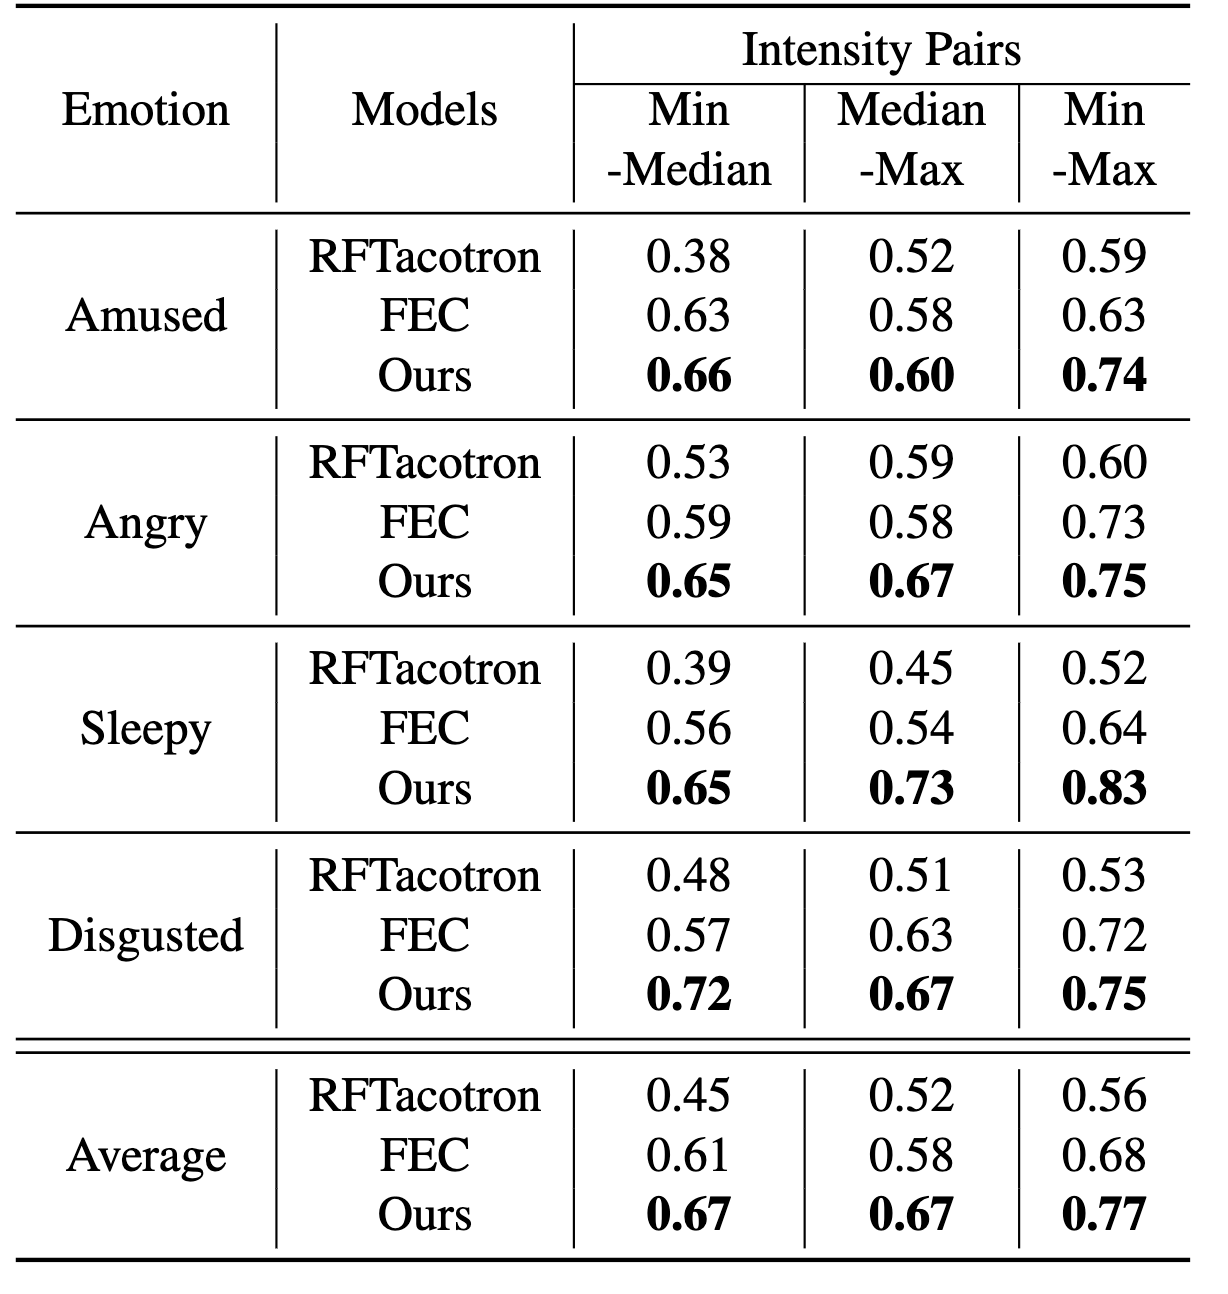 Rate Accuracy of Emotion Intensities. Min, Median and Max are three intensity levels. Subjects are asked to select the sample with the stronger intensity from a pair.